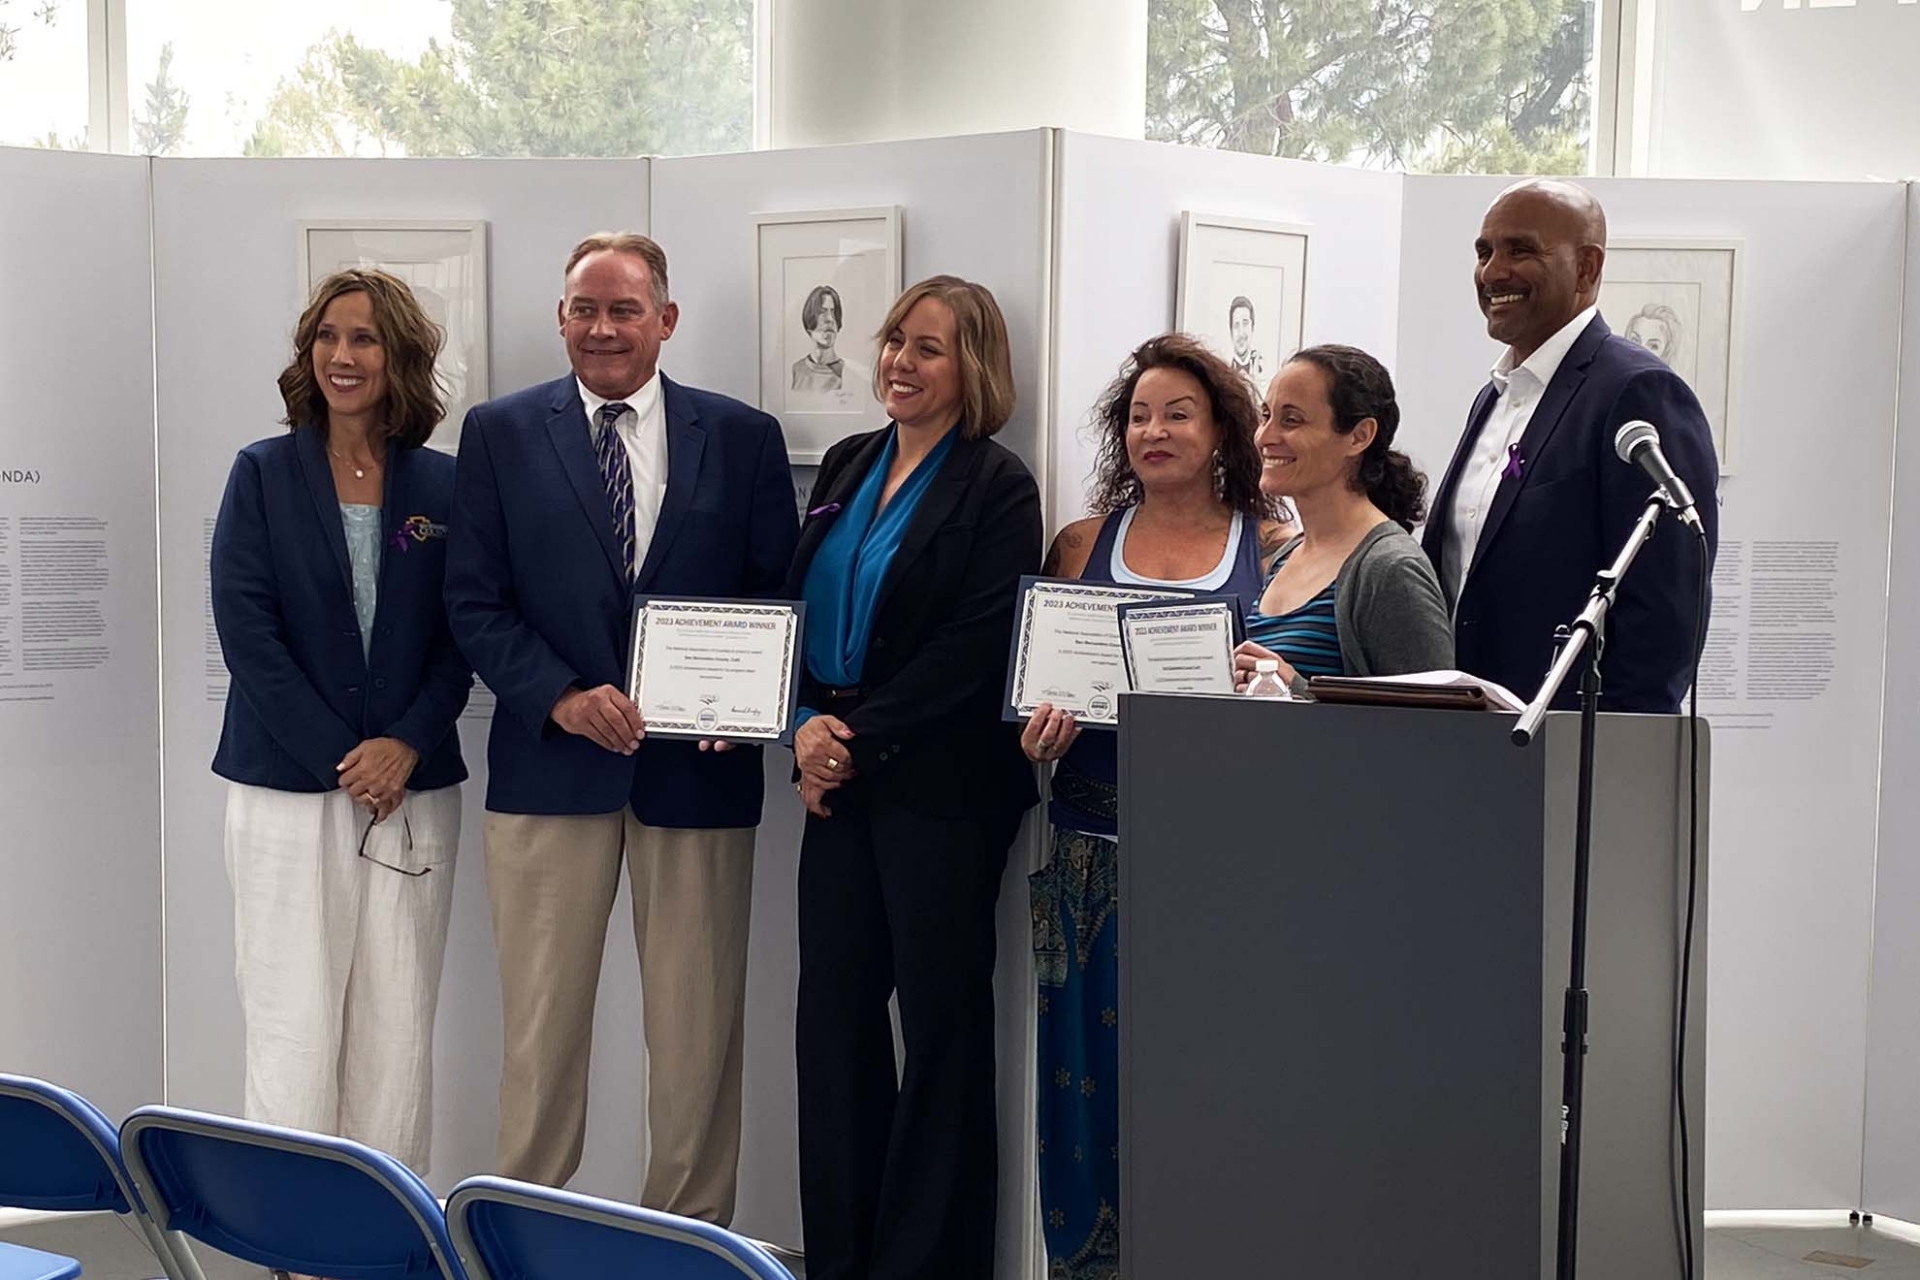 Representatives from San Bernardino County, the INTO LIGHT Project and Cal State San Bernardino hold certificates of achievement. The National Association of Counties (NACo) selected the California INTO LIGHT exhibition for an Achievement Award in the Arts, Culture and Historic Preservation Category for 2023.